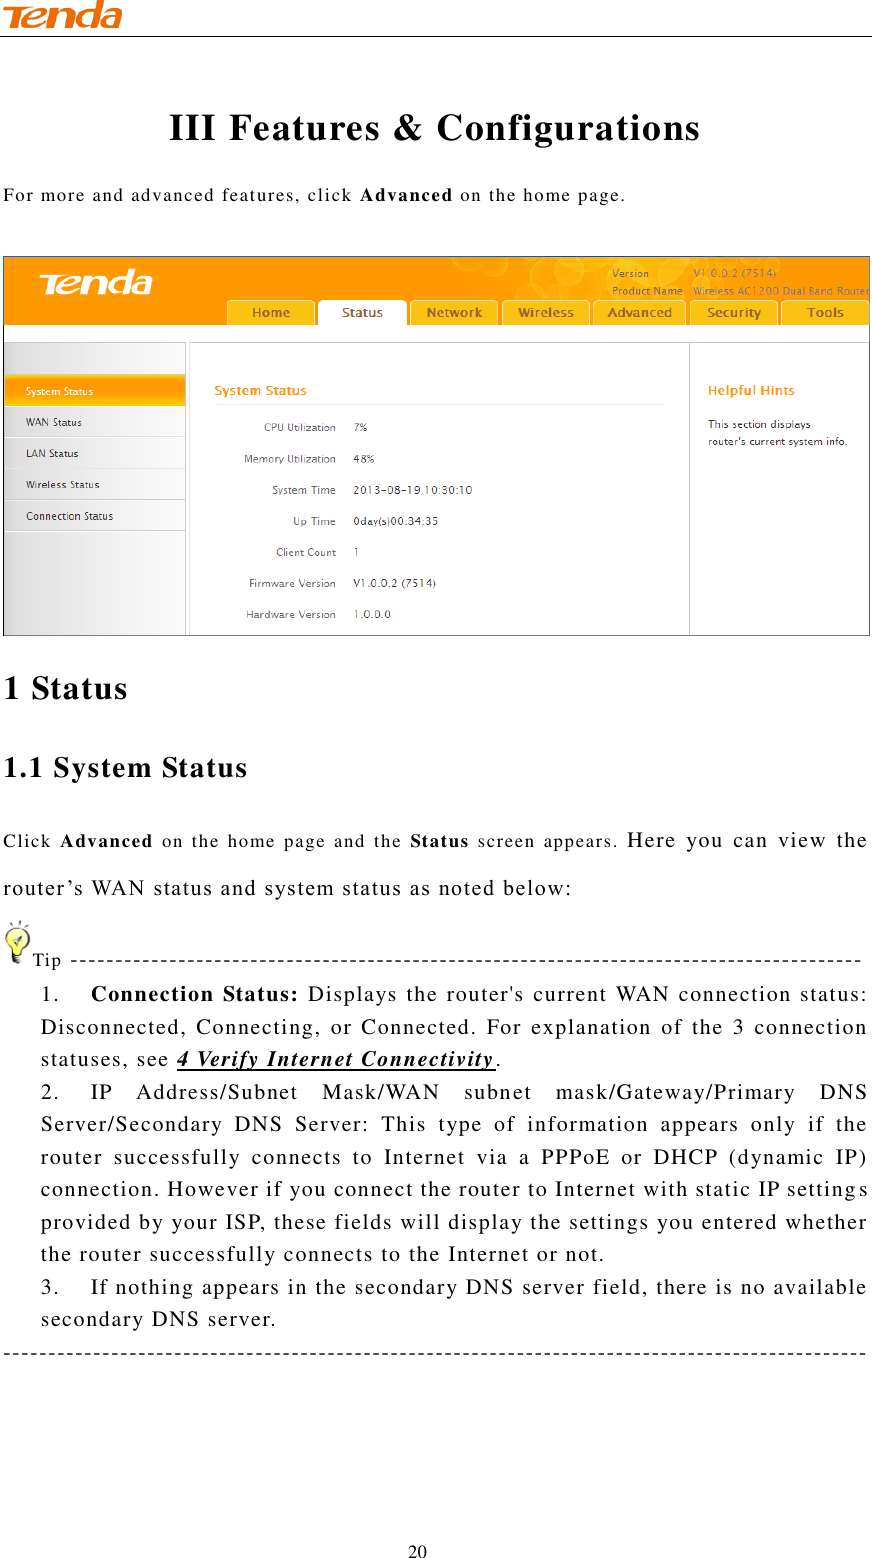                                    20 III Features &amp; Configurations For more and advanced features, click Advanced on the home page.   1 Status 1.1 System Status Click  Advanced  on  the  home  page  and  the  Status  screen  appears.  Here  you  can  view  the router’s WAN status and system status as noted below:  Tip ---------------------------------------------------------------------------------------- 1. Connection Status: Displays the router&apos;s current WAN connection status: Disconnected,  Connecting,  or  Connected.  For  explanation  of  the  3  connection statuses, see 4 Verify Internet Connectivity. 2. IP  Address/Subnet  Mask/WAN  subnet  mask/Gateway/Primary  DNS Server/Secondary  DNS  Server:  This  type  of  information  appears  only  if  the router  successfully  connects  to  Internet  via  a  PPPoE  or  DHCP  (dynamic  IP) connection. However if you connect the router to Internet with static IP setting s provided by your ISP, these fields will display the settings you entered whether the router successfully connects to the Internet or not.  3. If nothing appears in the secondary DNS server field, there is no available secondary DNS server. ------------------------------------------------------------------------------------------------  